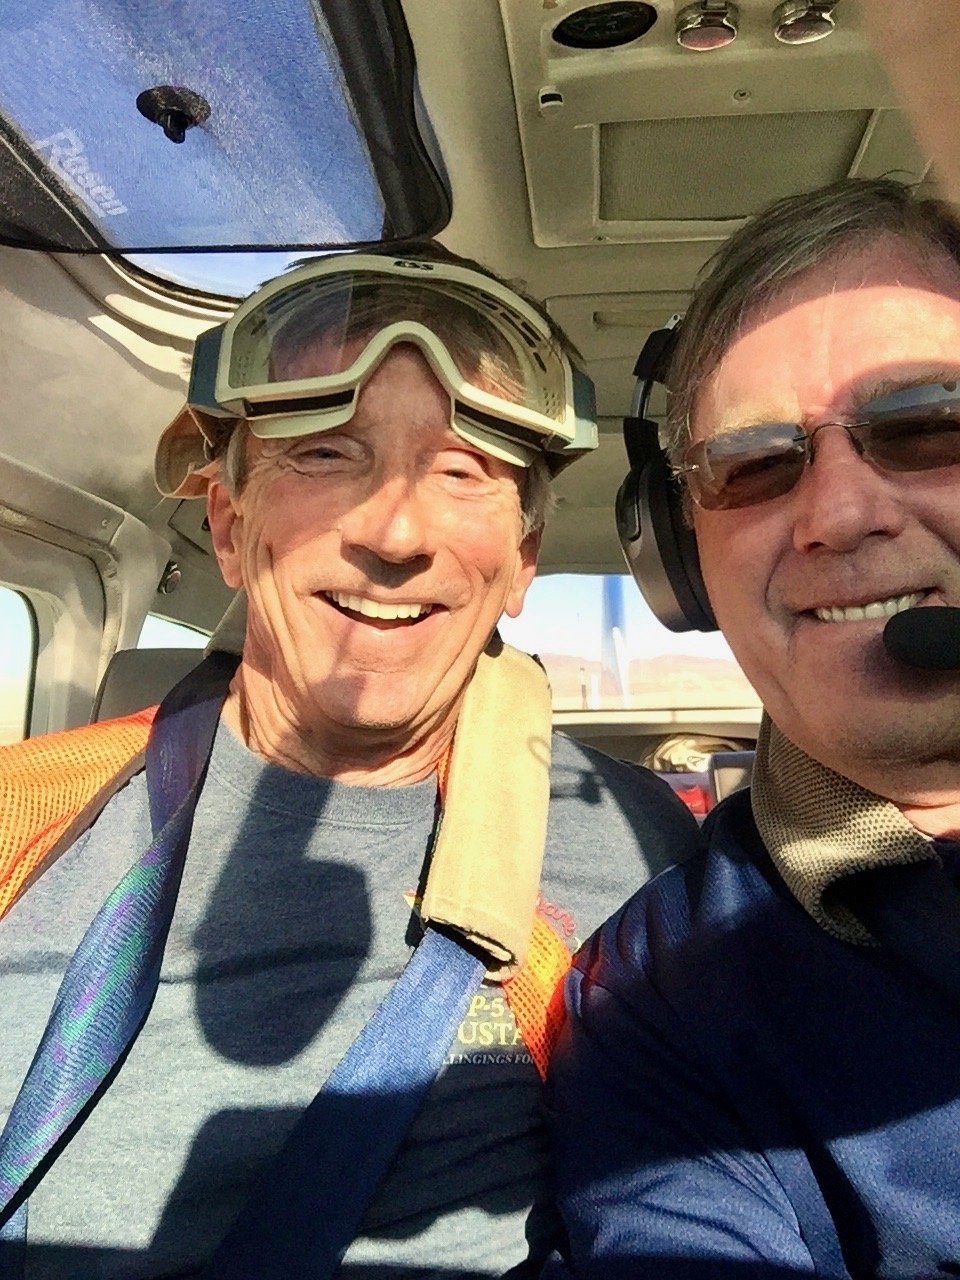   Rick Fordem and Denny Breslin practicing the “Message Box Drop” at Borrego Air Park  